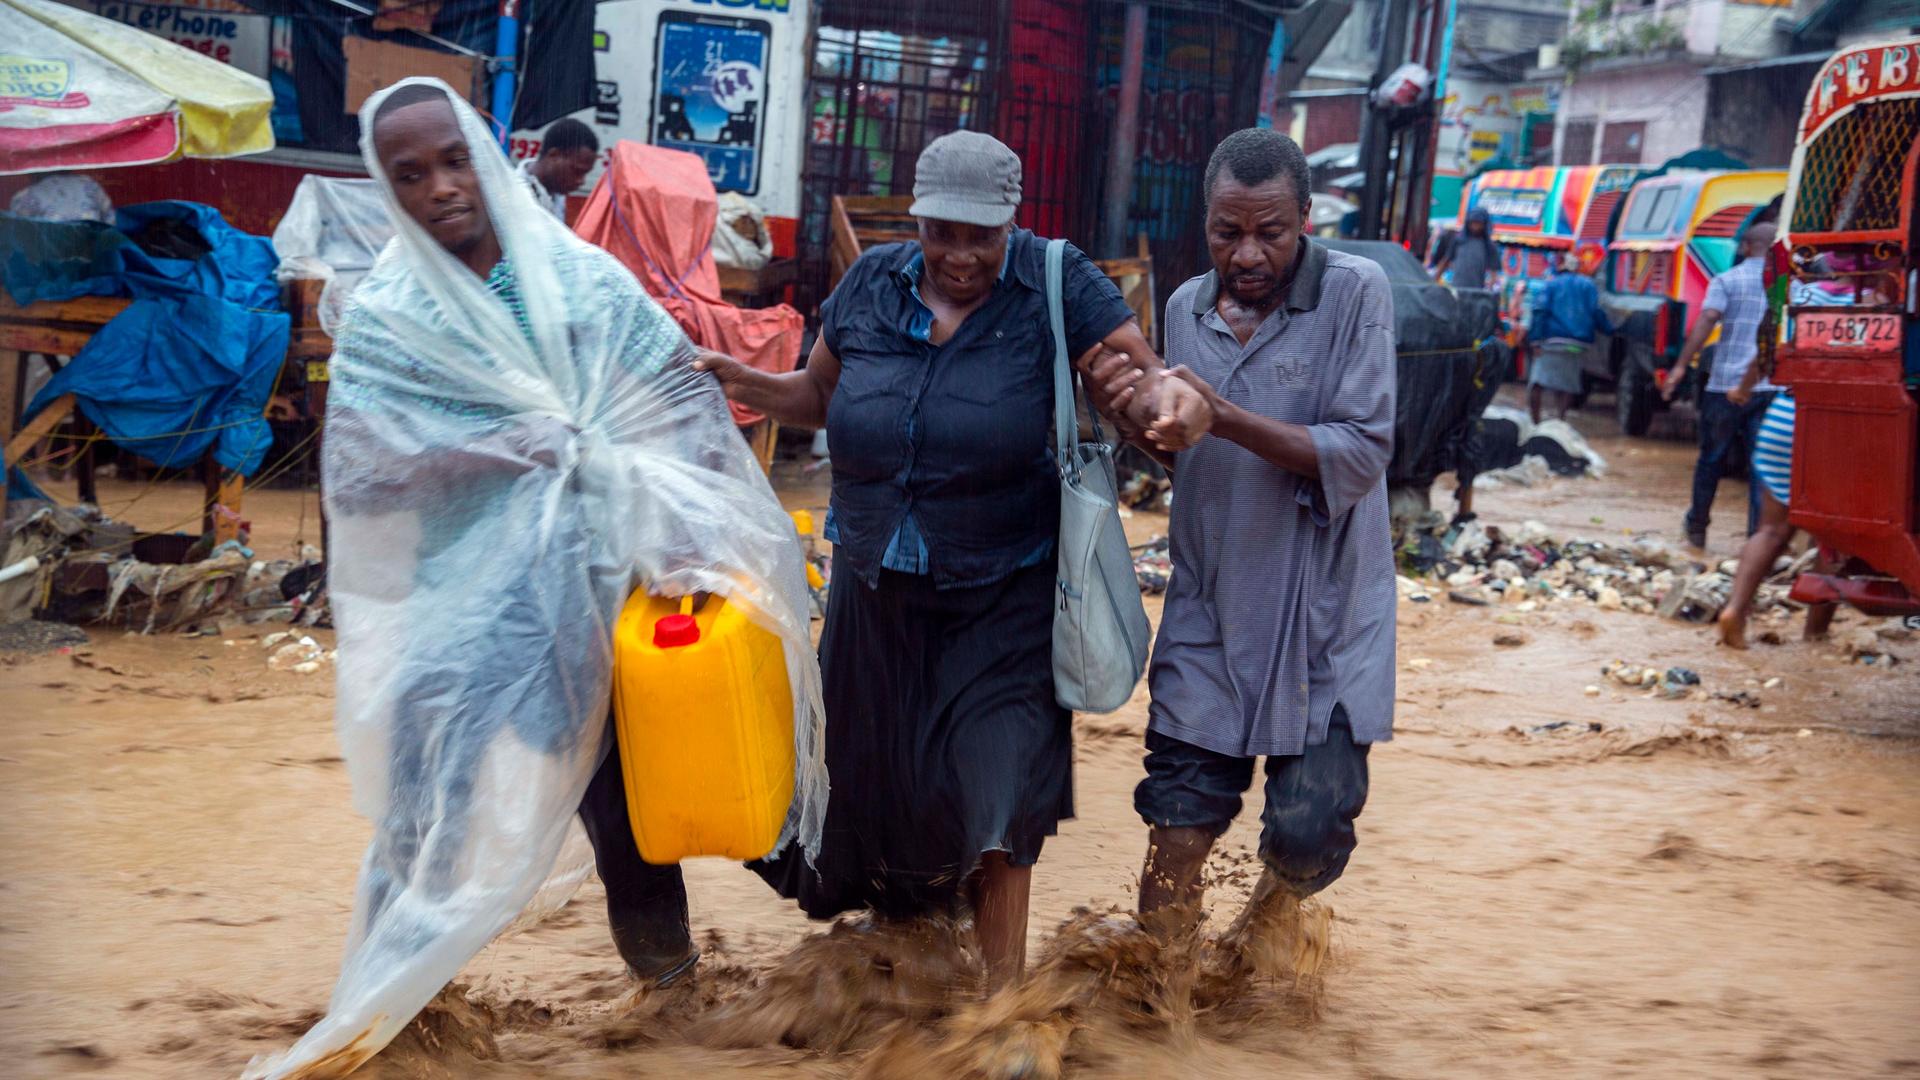 Two men are shown helping a woman as they wade through a flooded street.